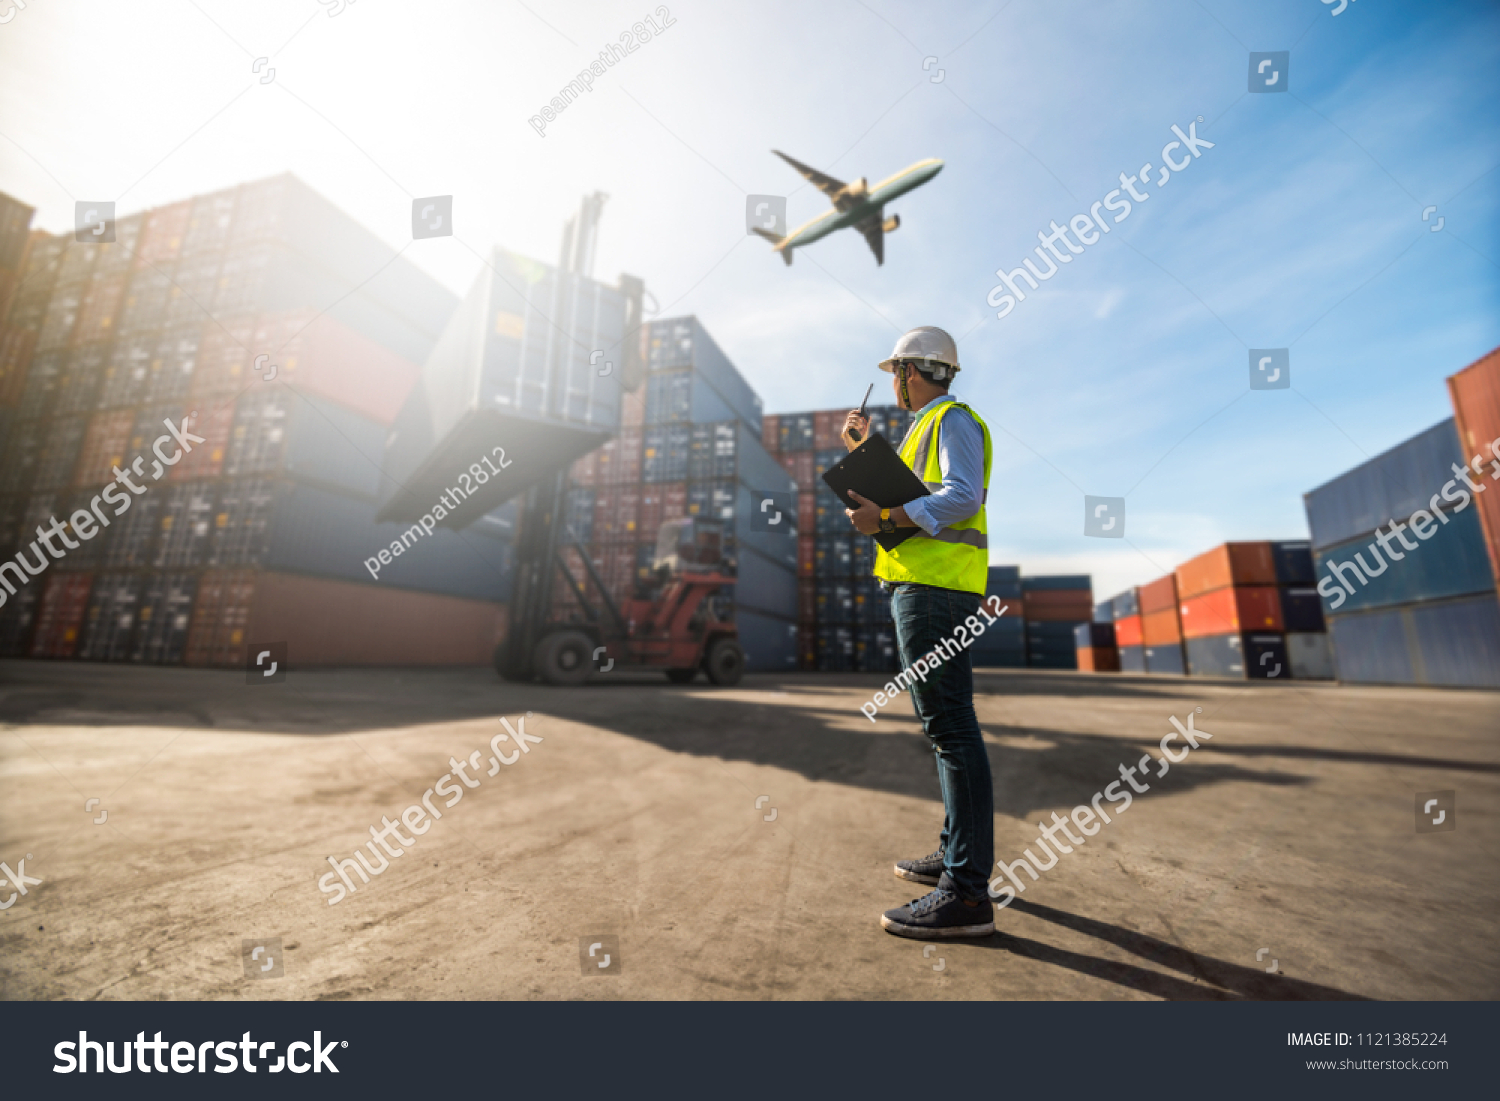 Foreman control loading Containers box to truck for Logistic Import Export Background, Business logistic concept, import and export concept
 #1121385224